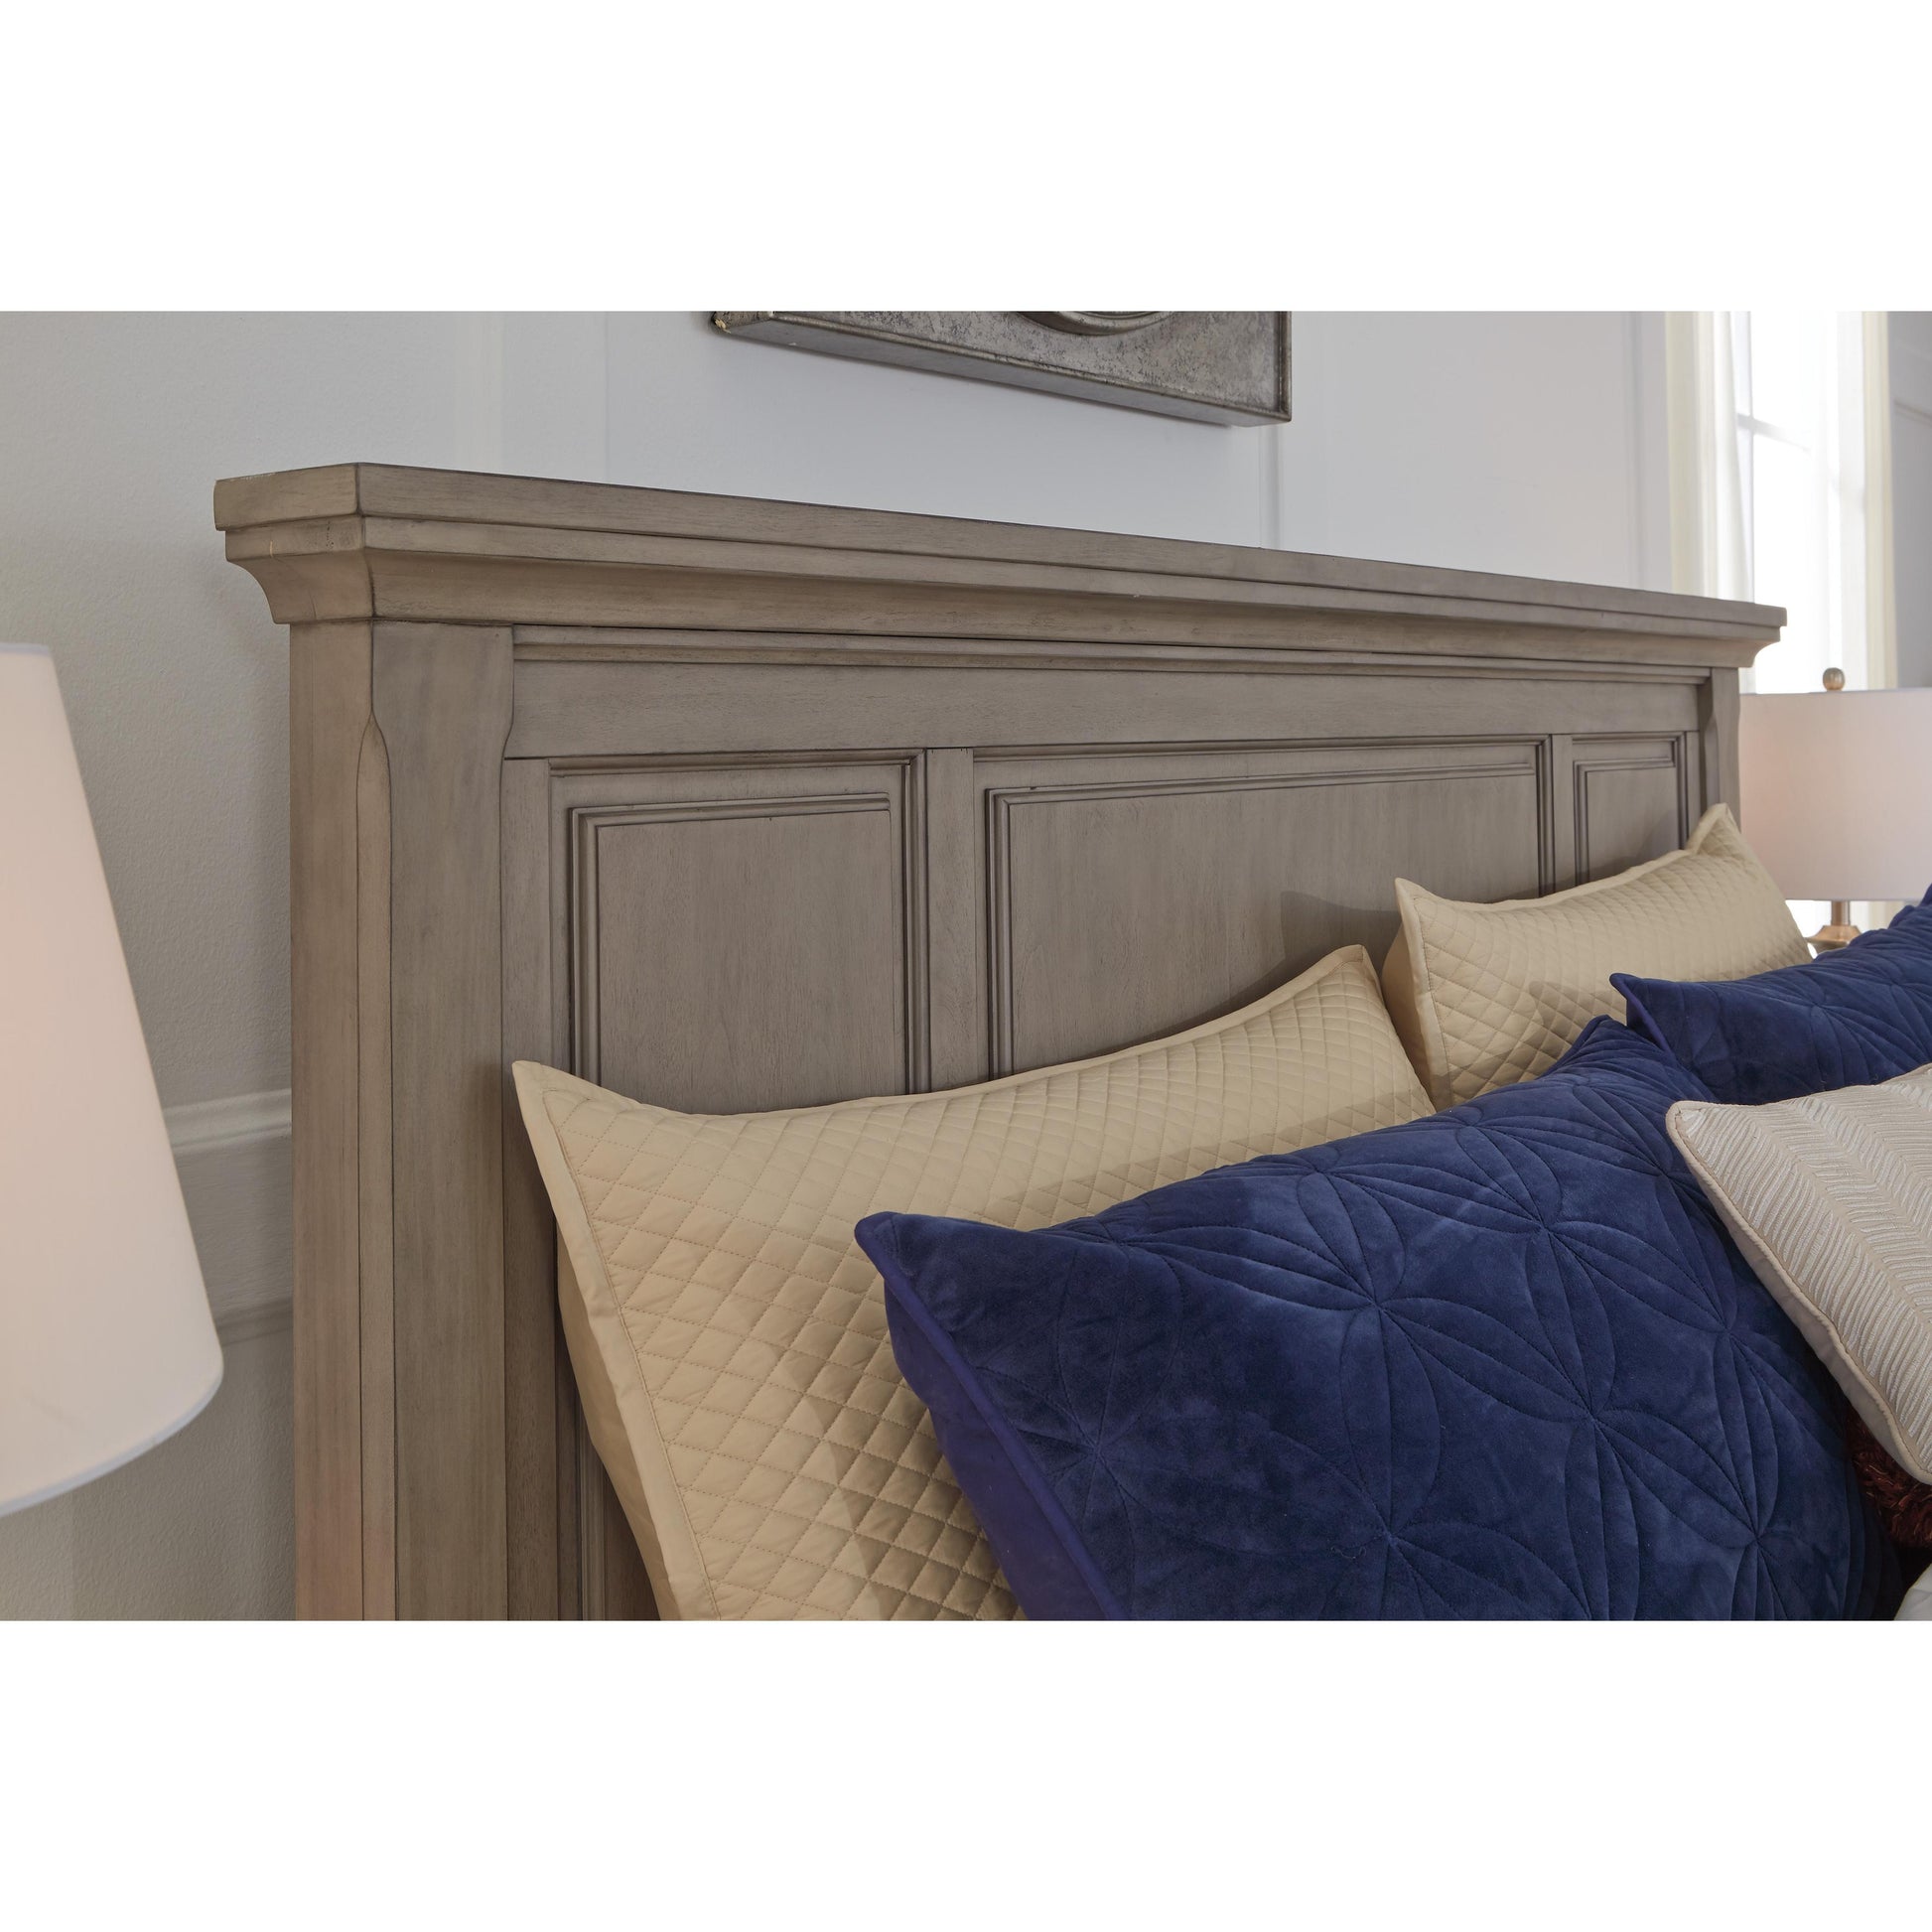 Signature Design by Ashley Lettner Queen Panel Bed B733-57/B733-54/B733-96